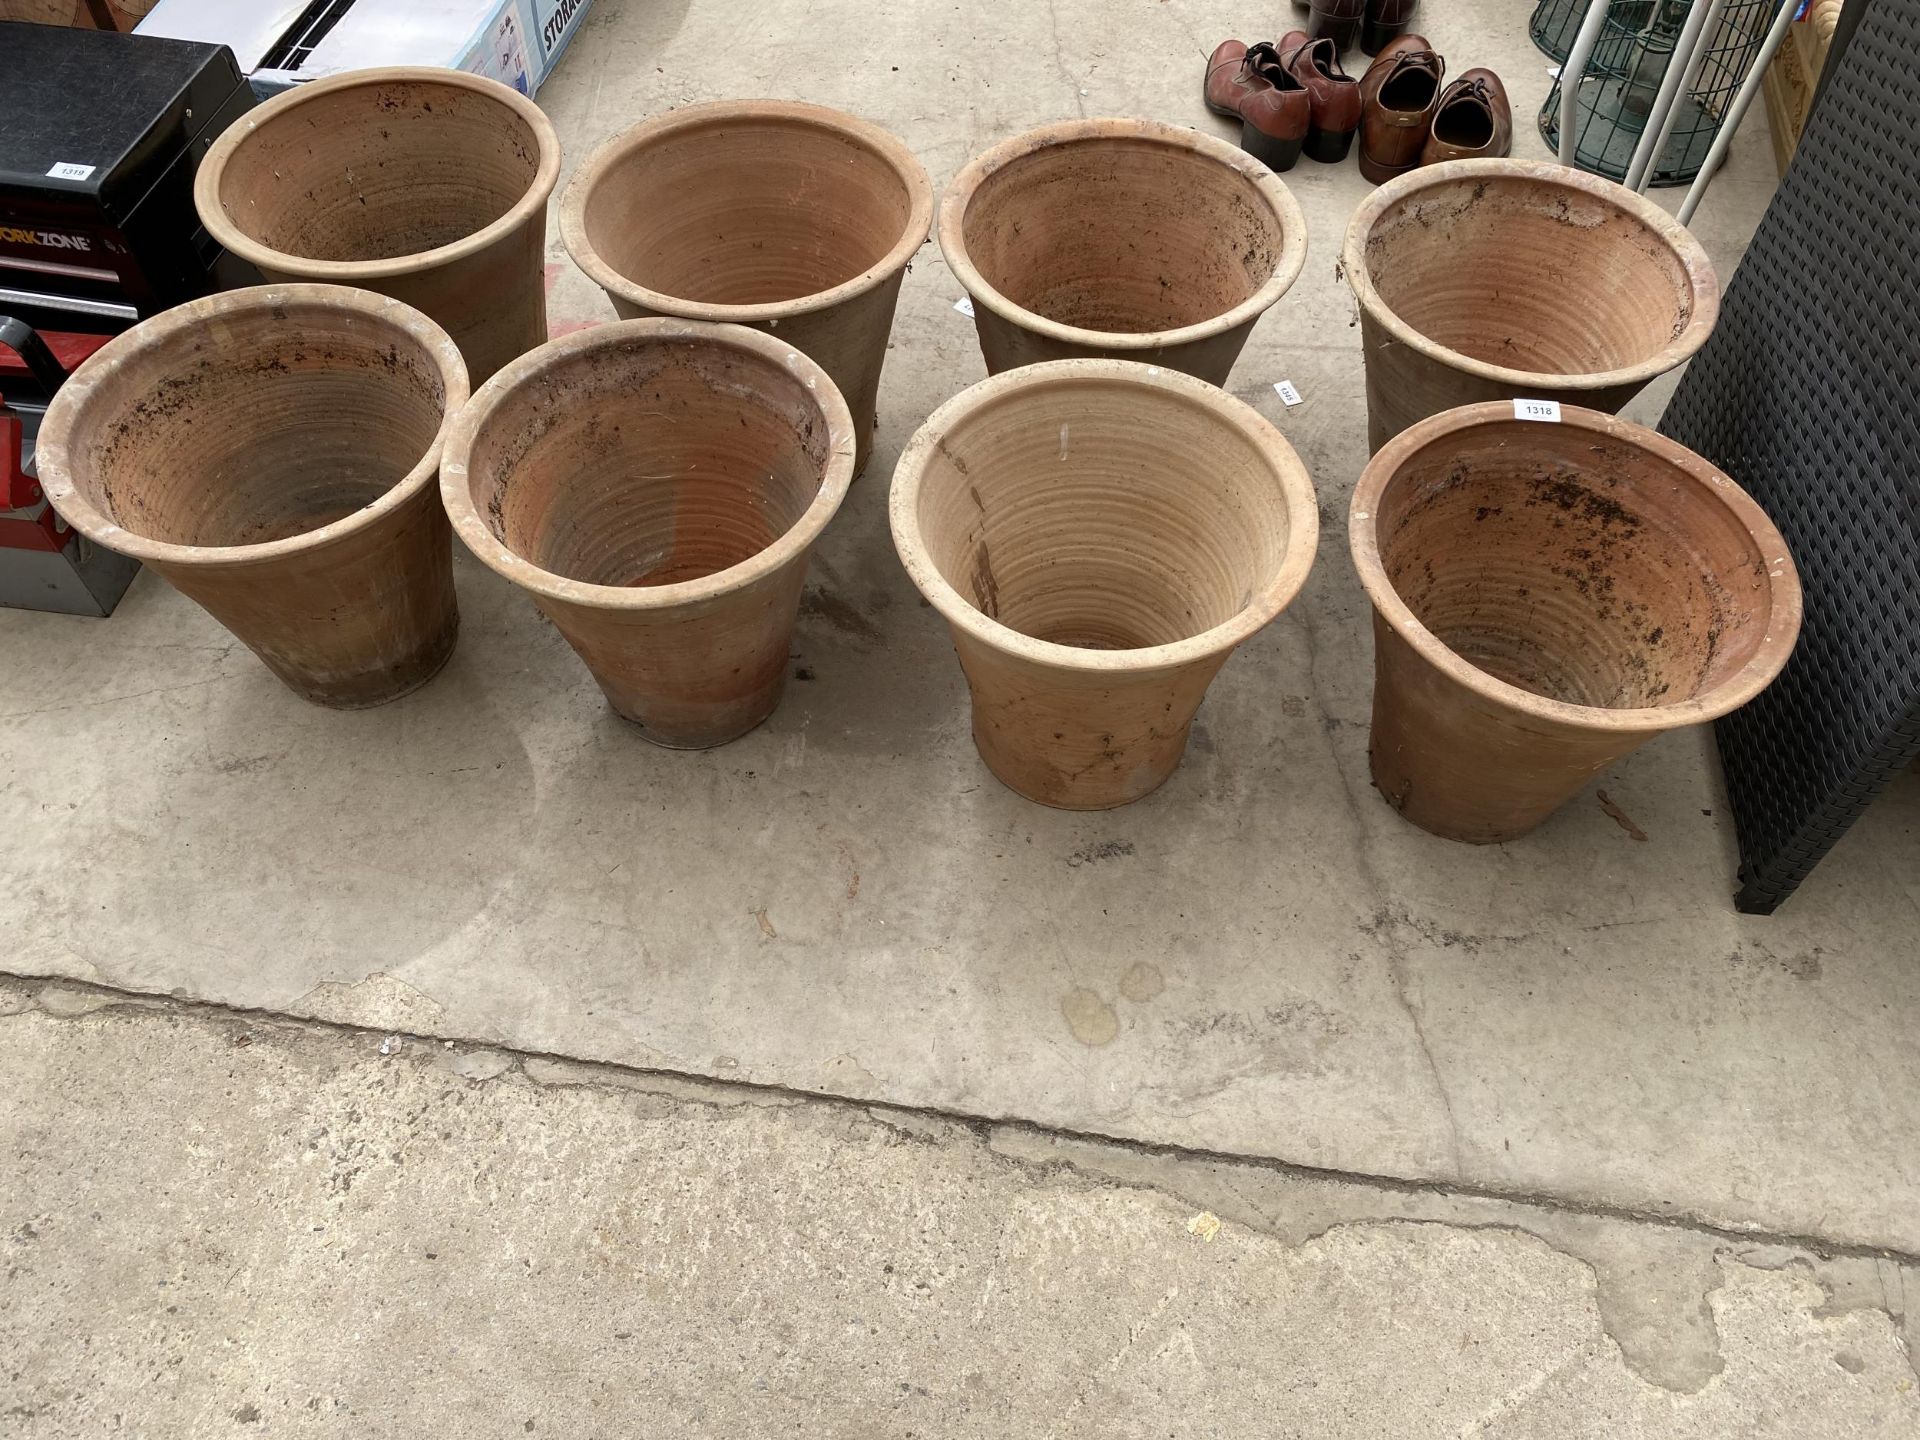 A COLLECTION OF EIGHT LARGE TERRACOTTA GARDEN POTS